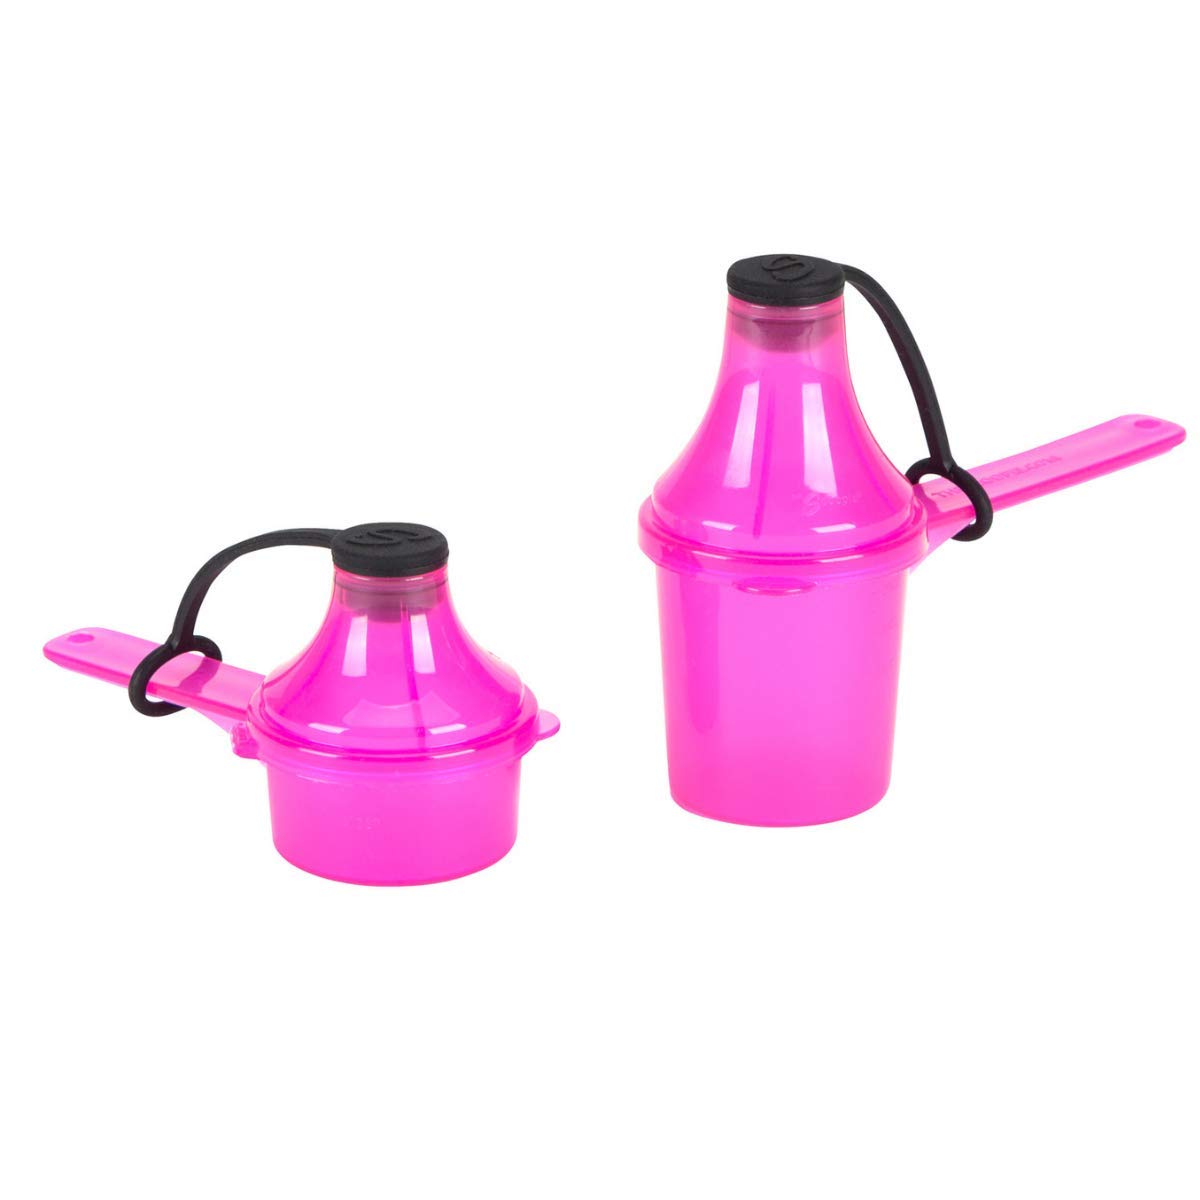 The Scoopie Supplement Container, Scoop Funnel System for Pre Workout Powder, Spill Proof Dispenser, Gym Shaker Bottle Travel Accessory, Pack of 2, Pink (1 tbsp.5 Oz, 15 mL) (2 tbsp, 1 Oz, 29.6 mL)